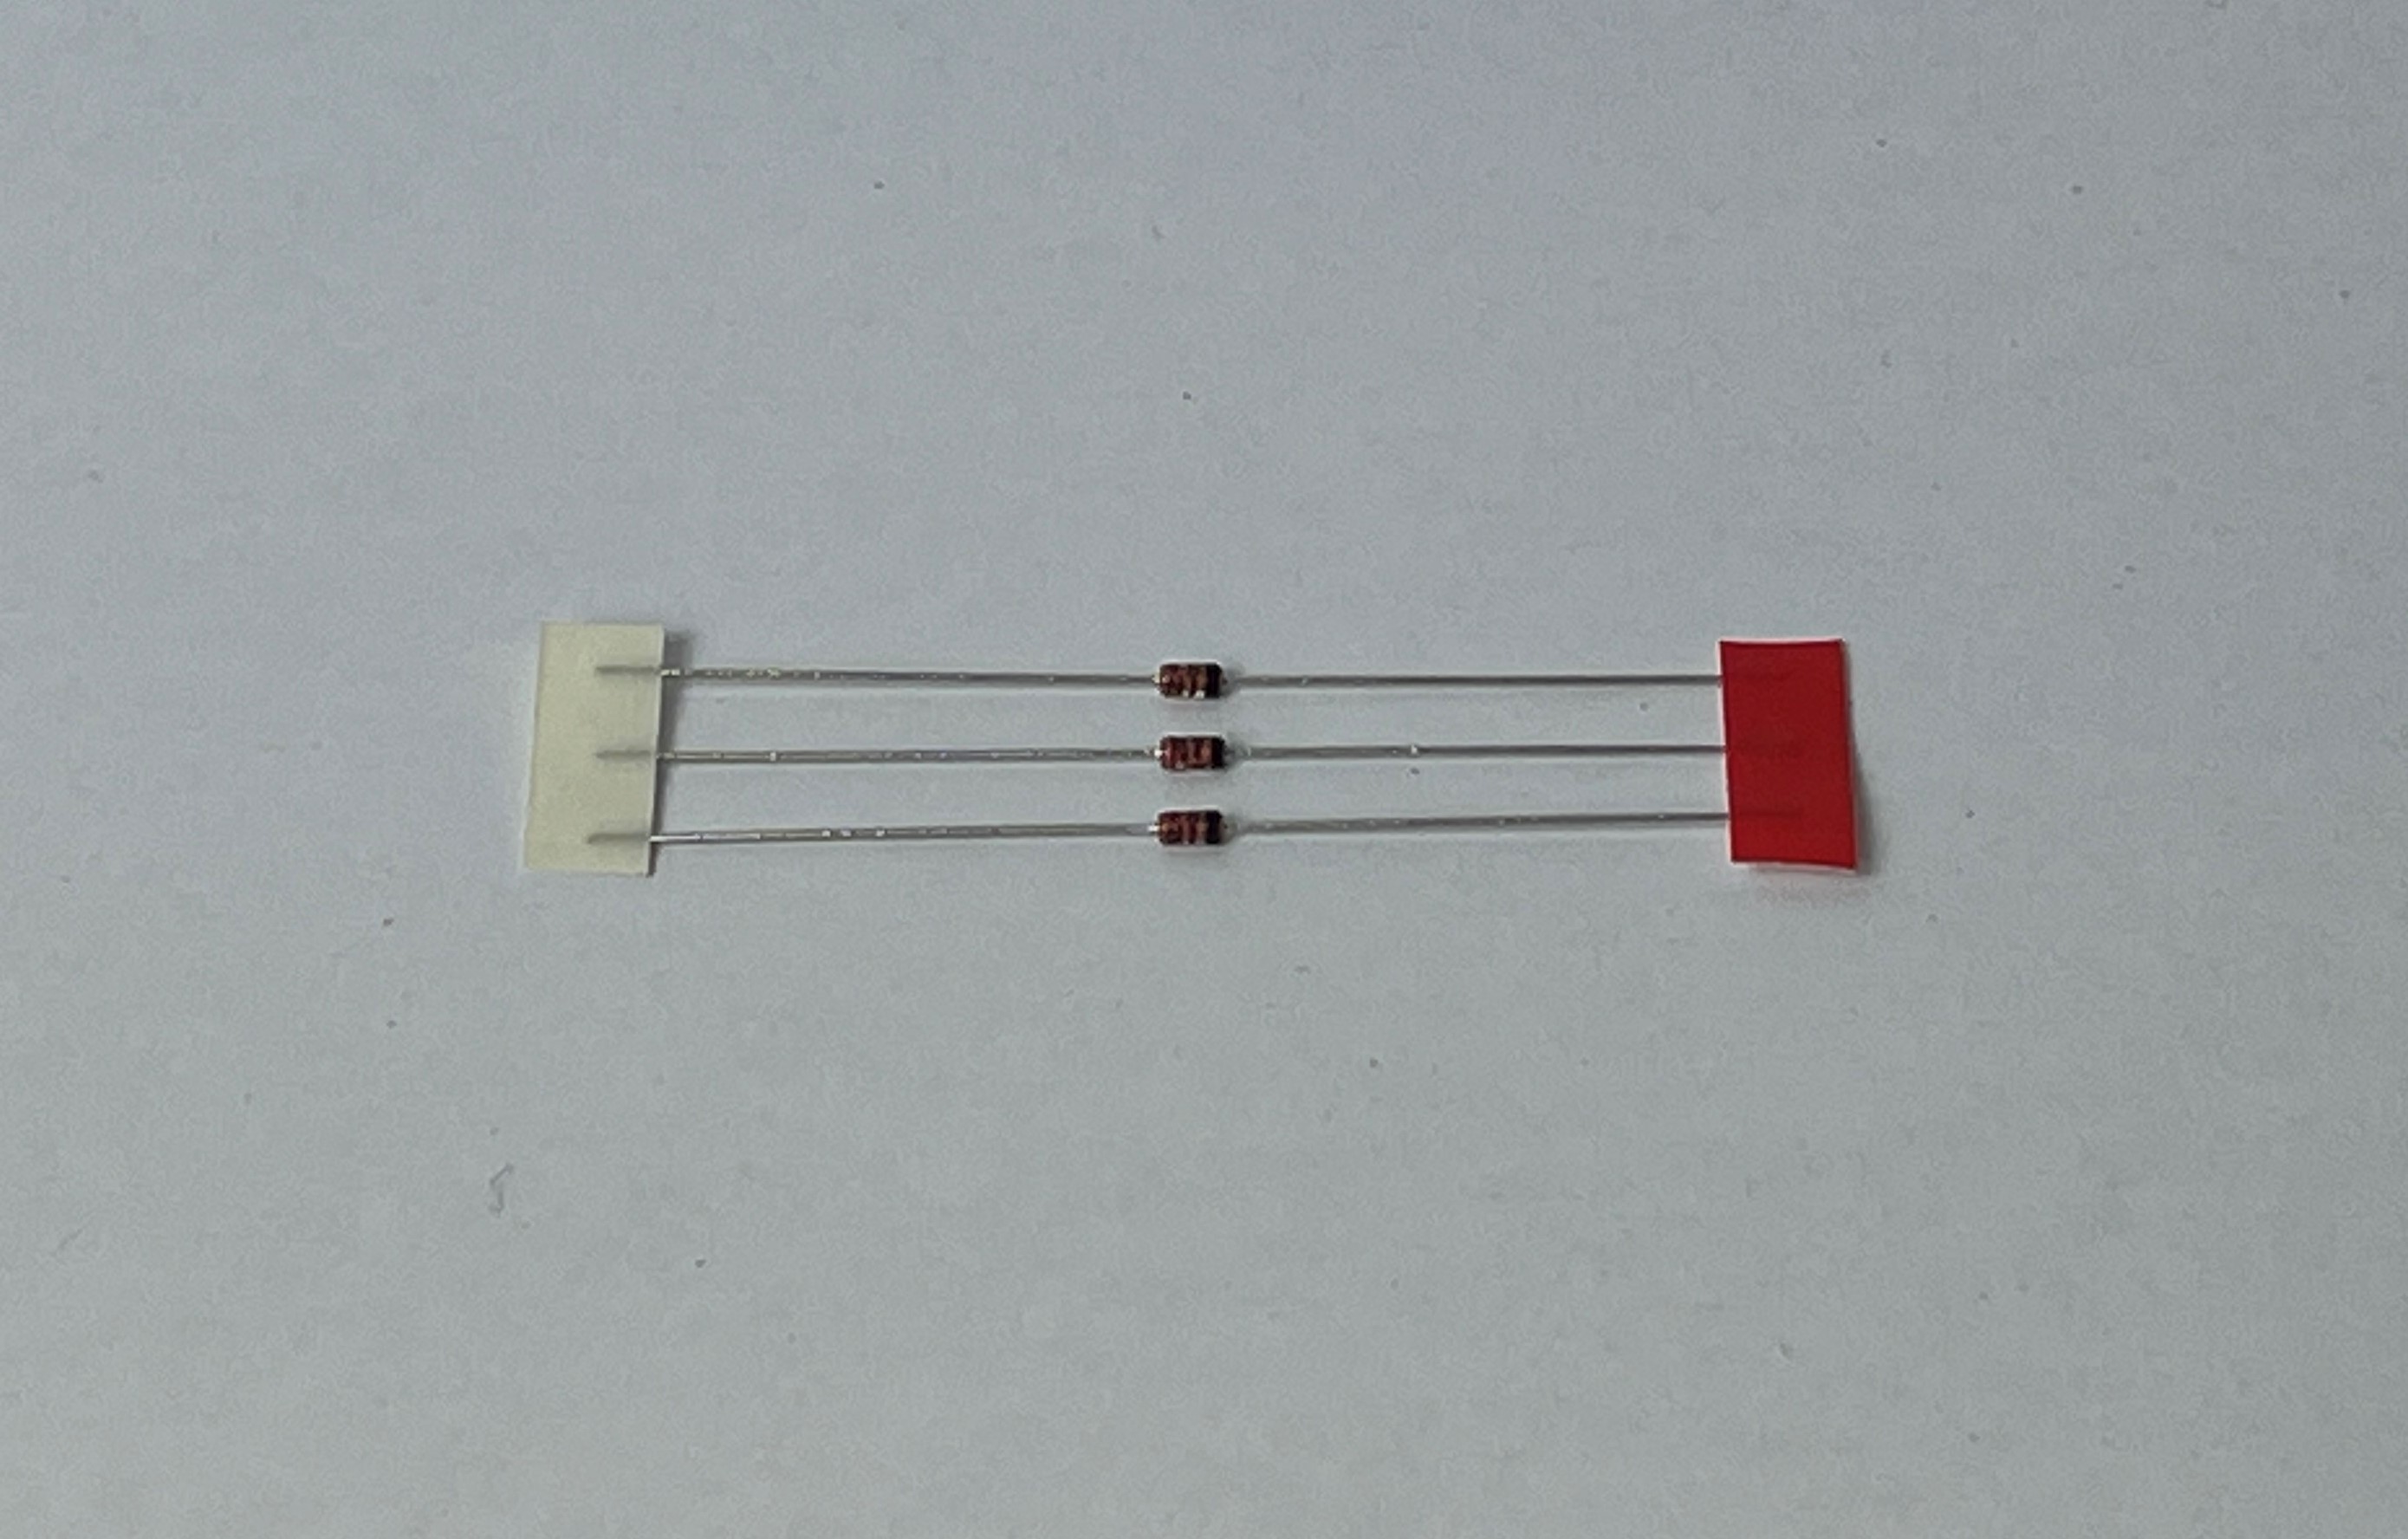 Picture of some diodes